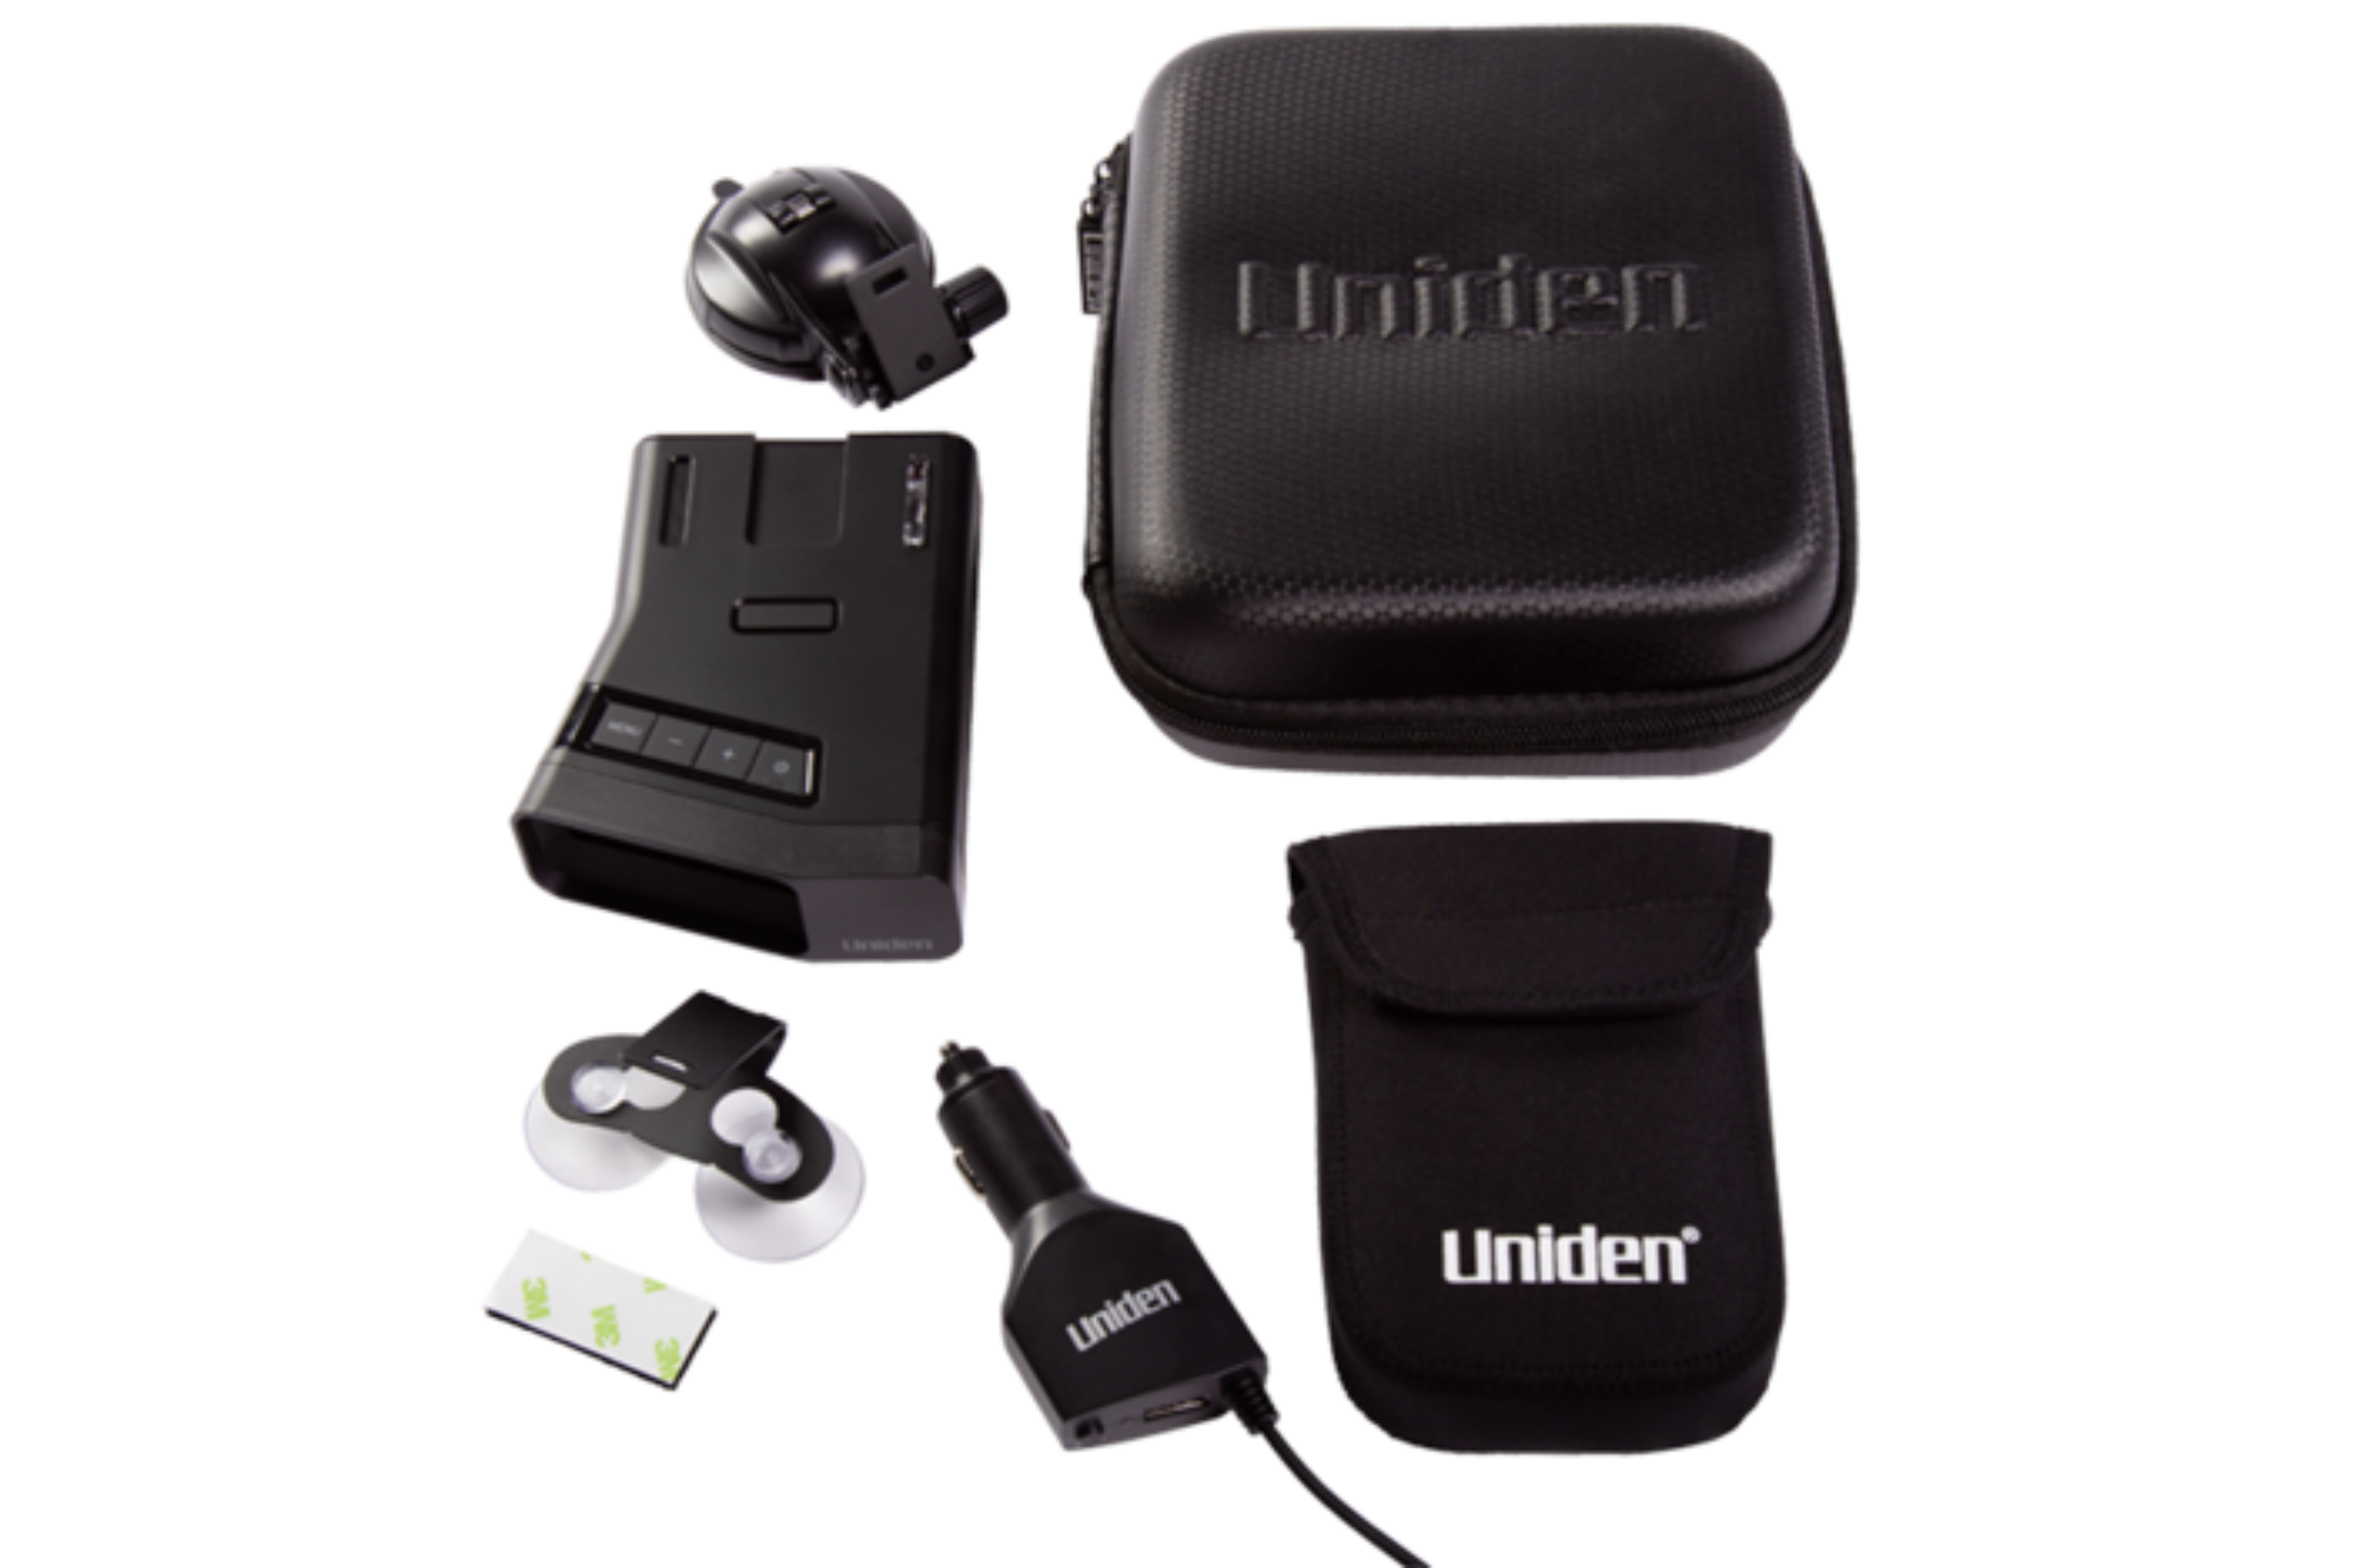 Uniden R7 Xtreme Long Range Laser/Radar Detector, Built-in GPS with Auto  Learn Mode, Dual-Antennas Front & Rear w/Directional Arrows, Voice Alerts